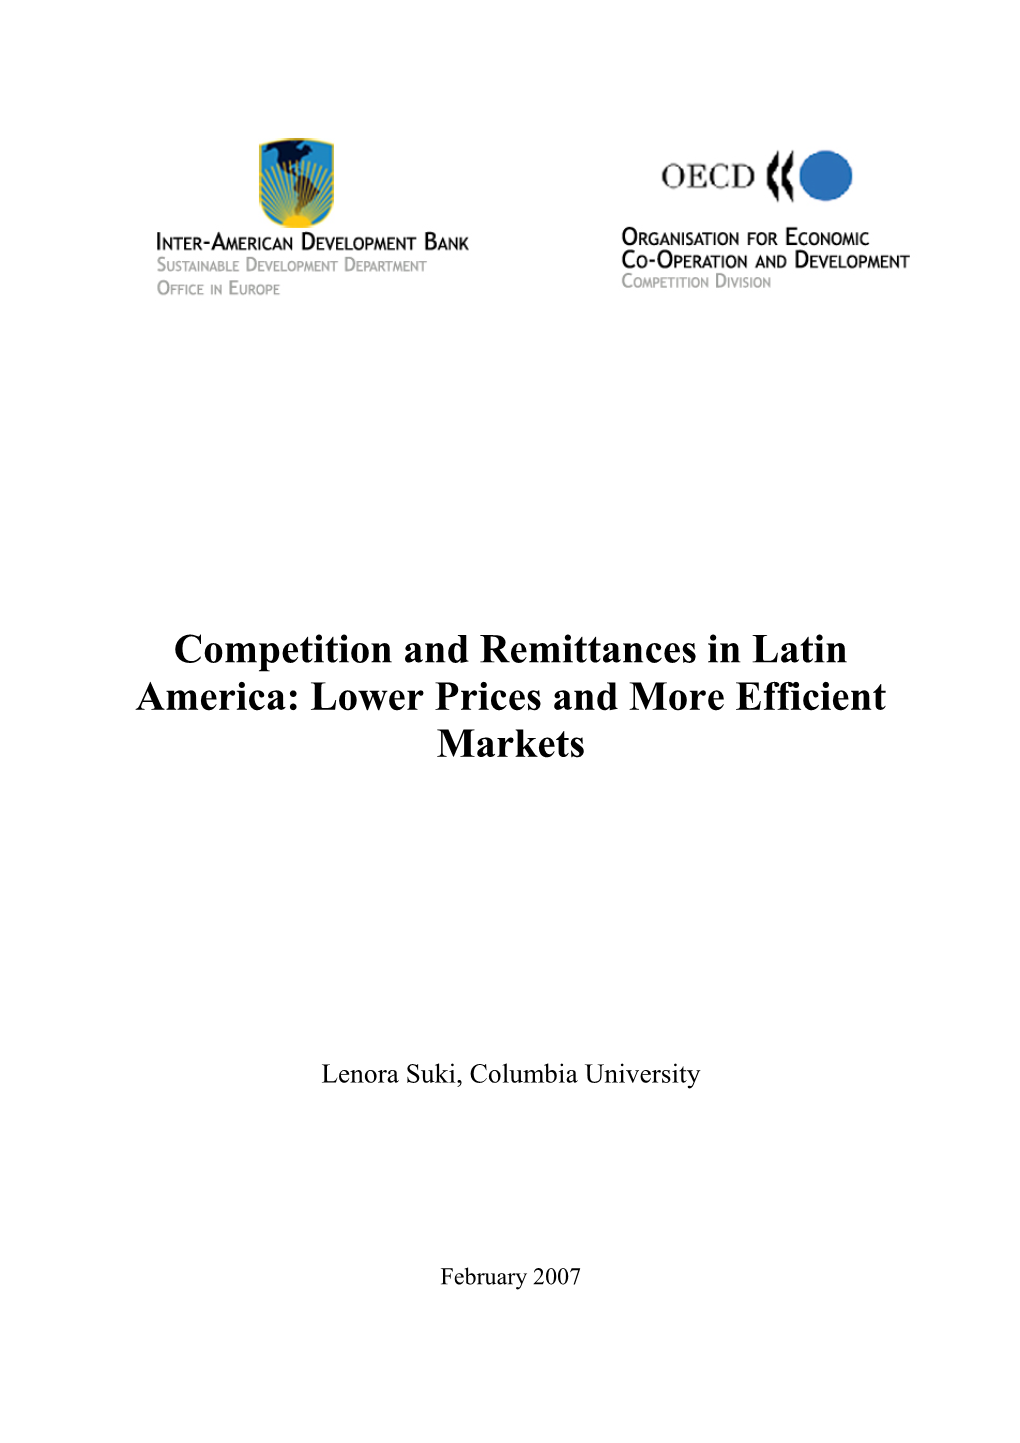 Competition and Remittances in Latin America: Lower Prices and More Efficient Markets